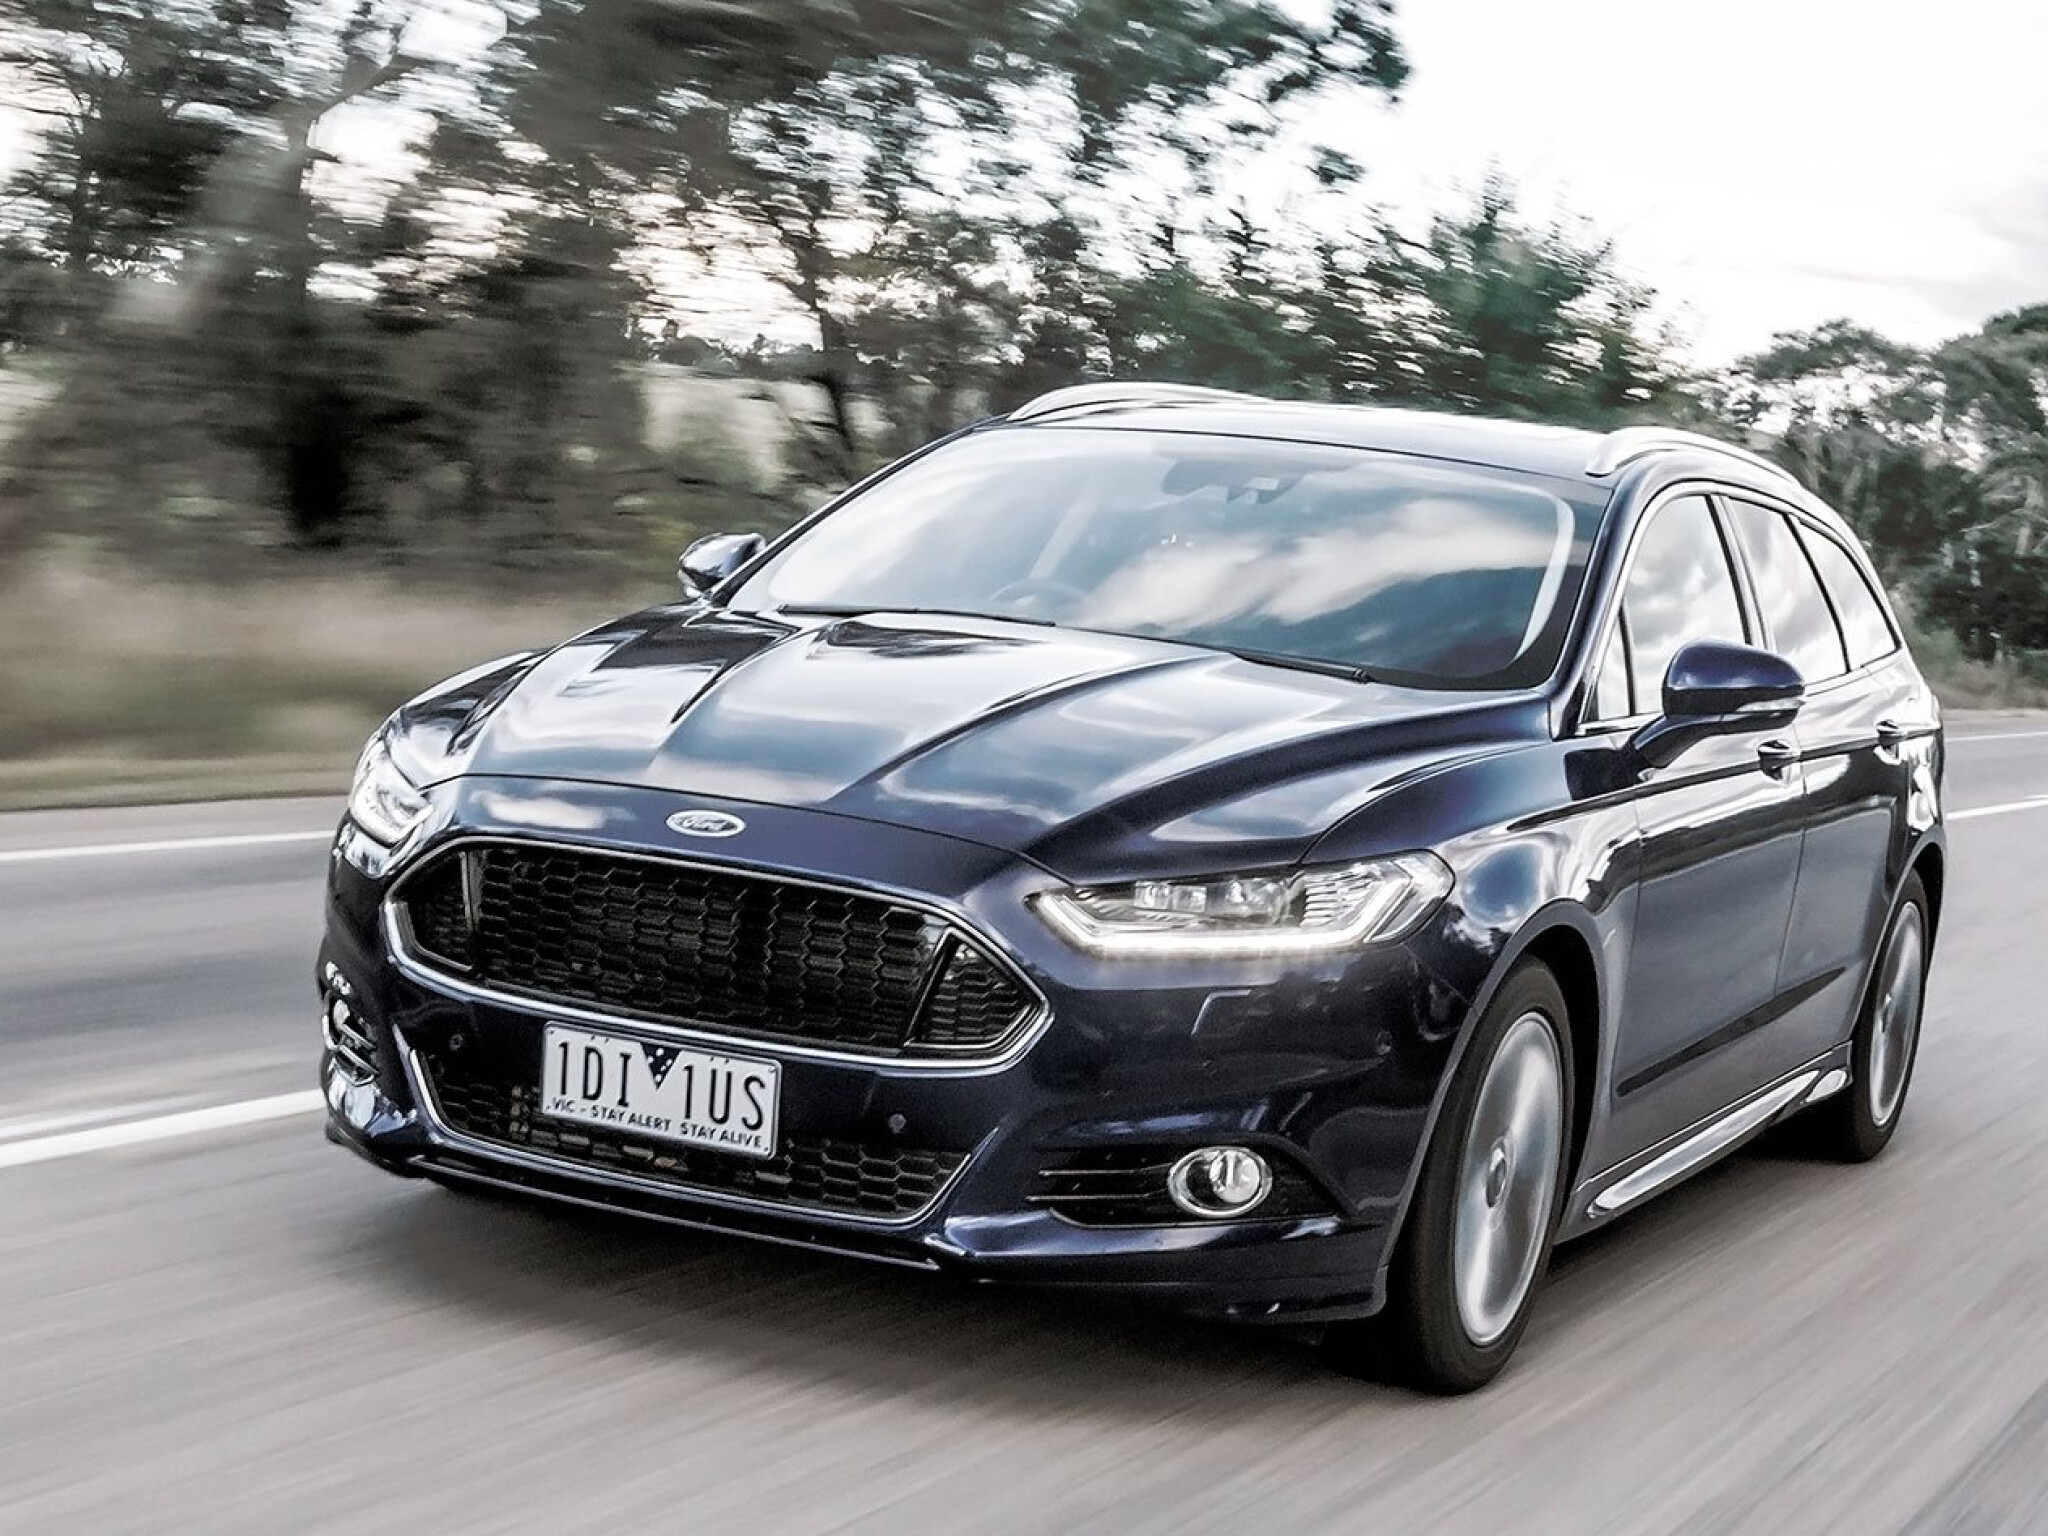 Ford Mondeo 2018 Review, Price & Features